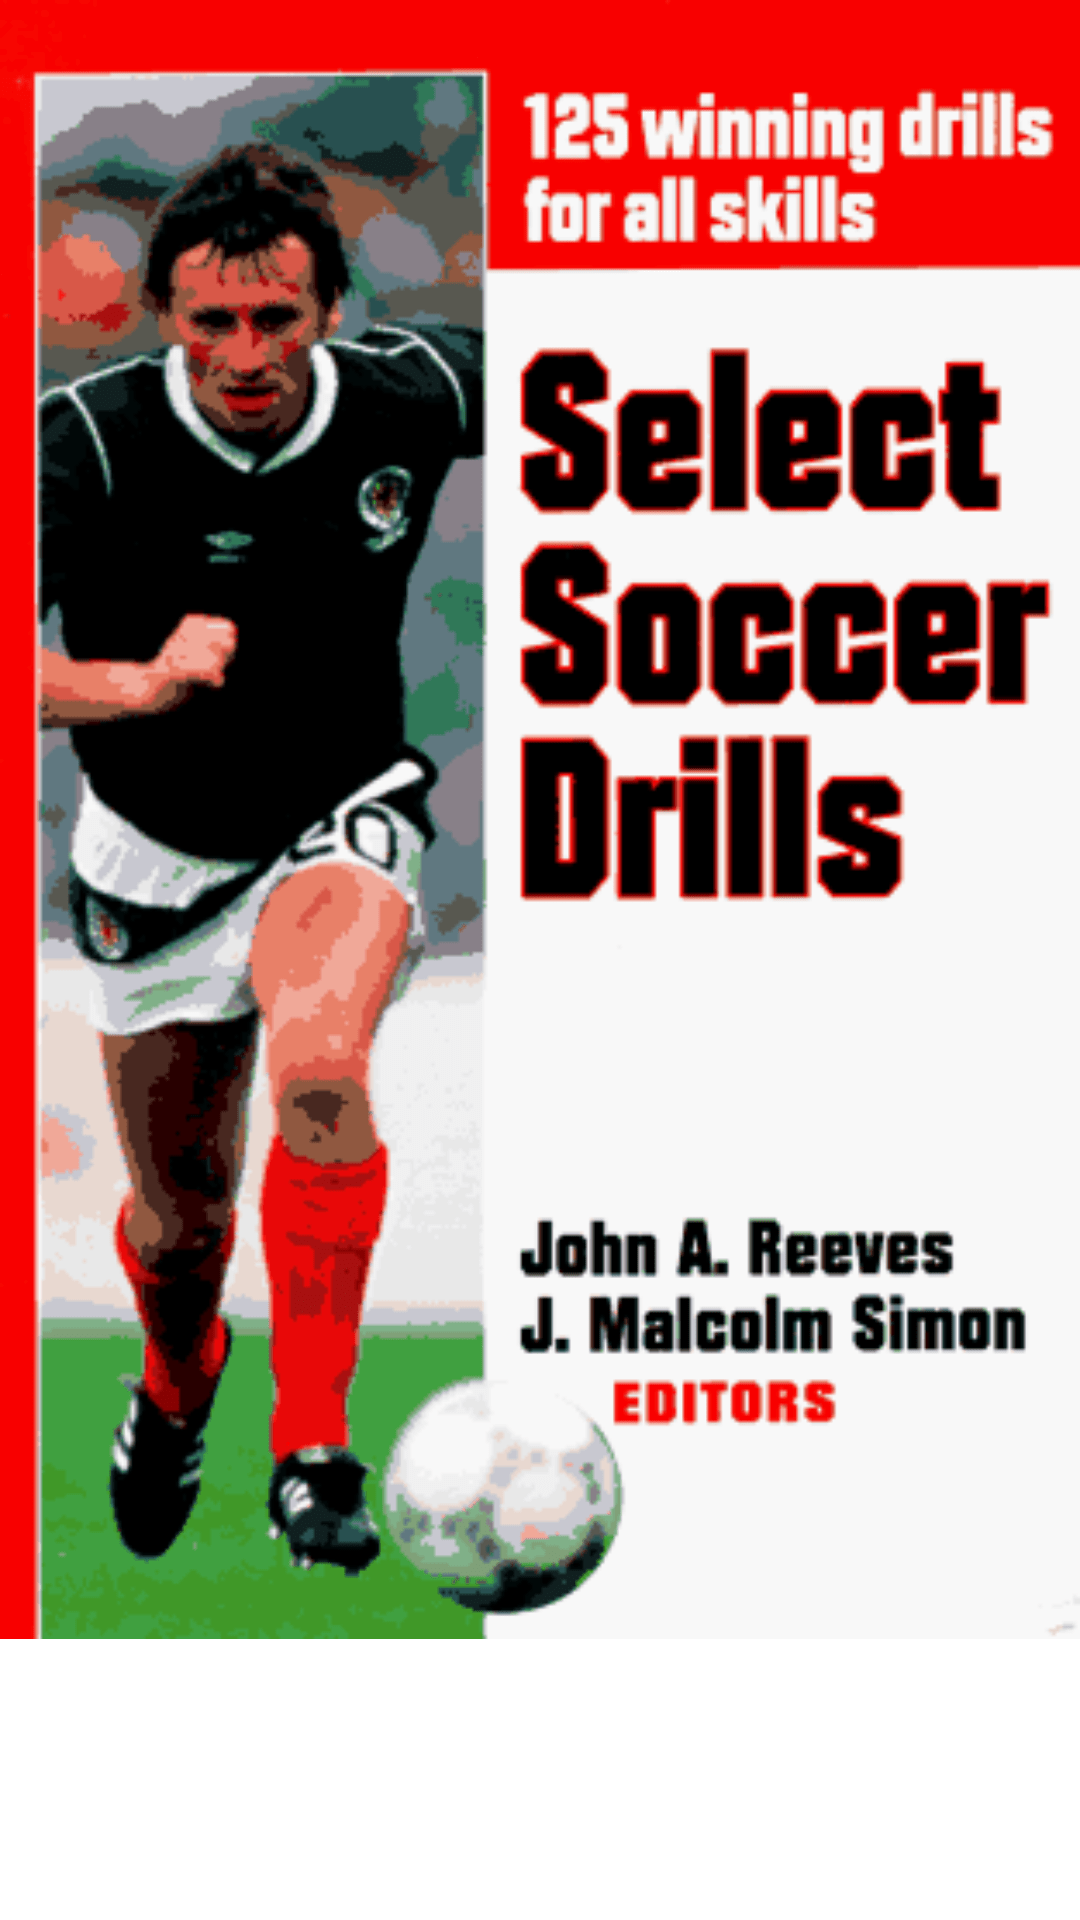 Select Soccer Drills by John A. Reeves